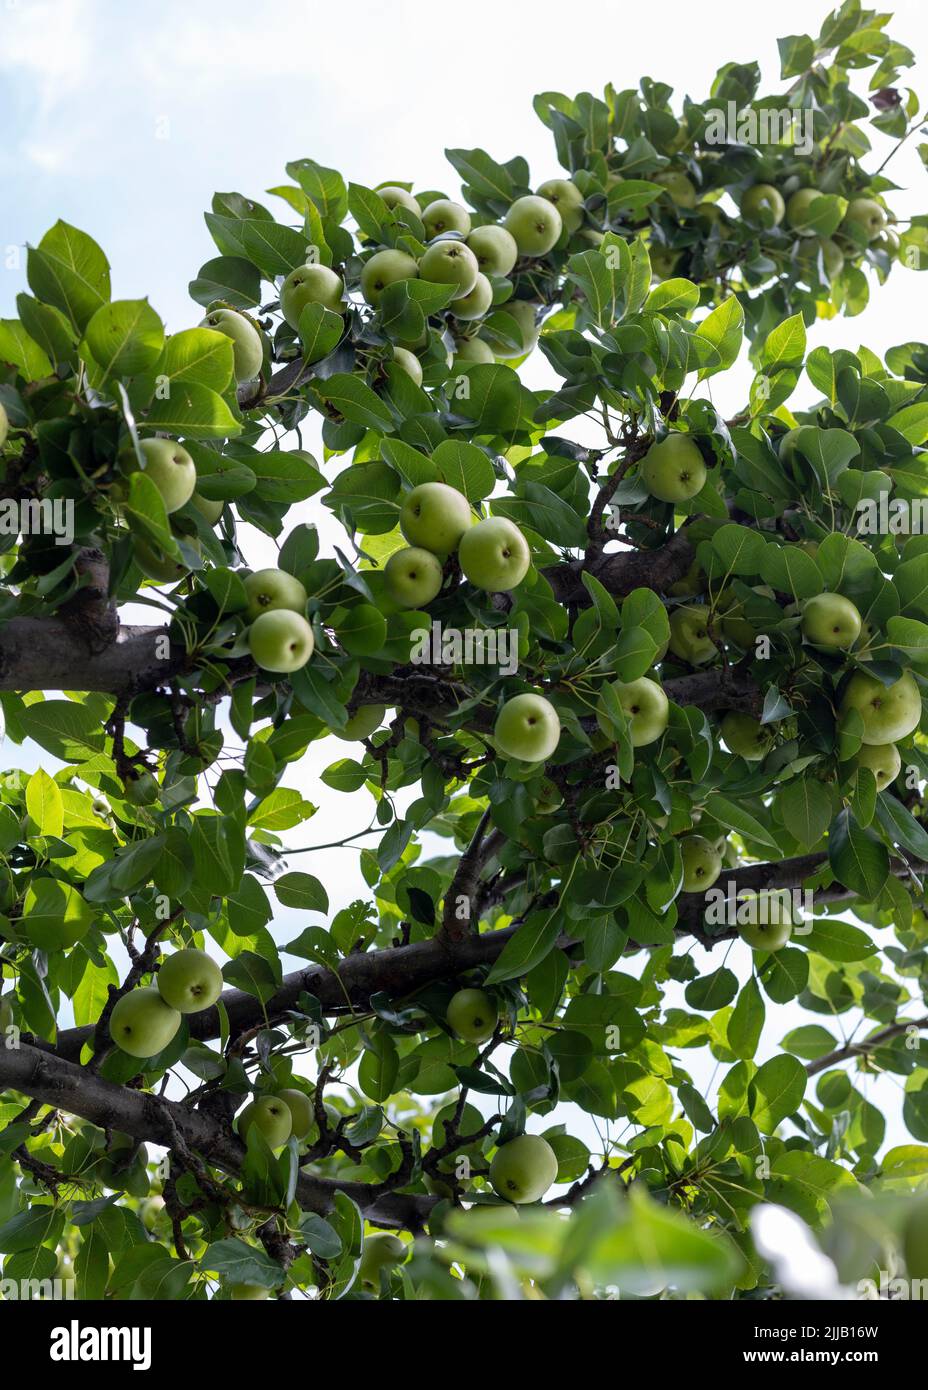 Tree full with pear fruit in an fruit orchard Stock Photo